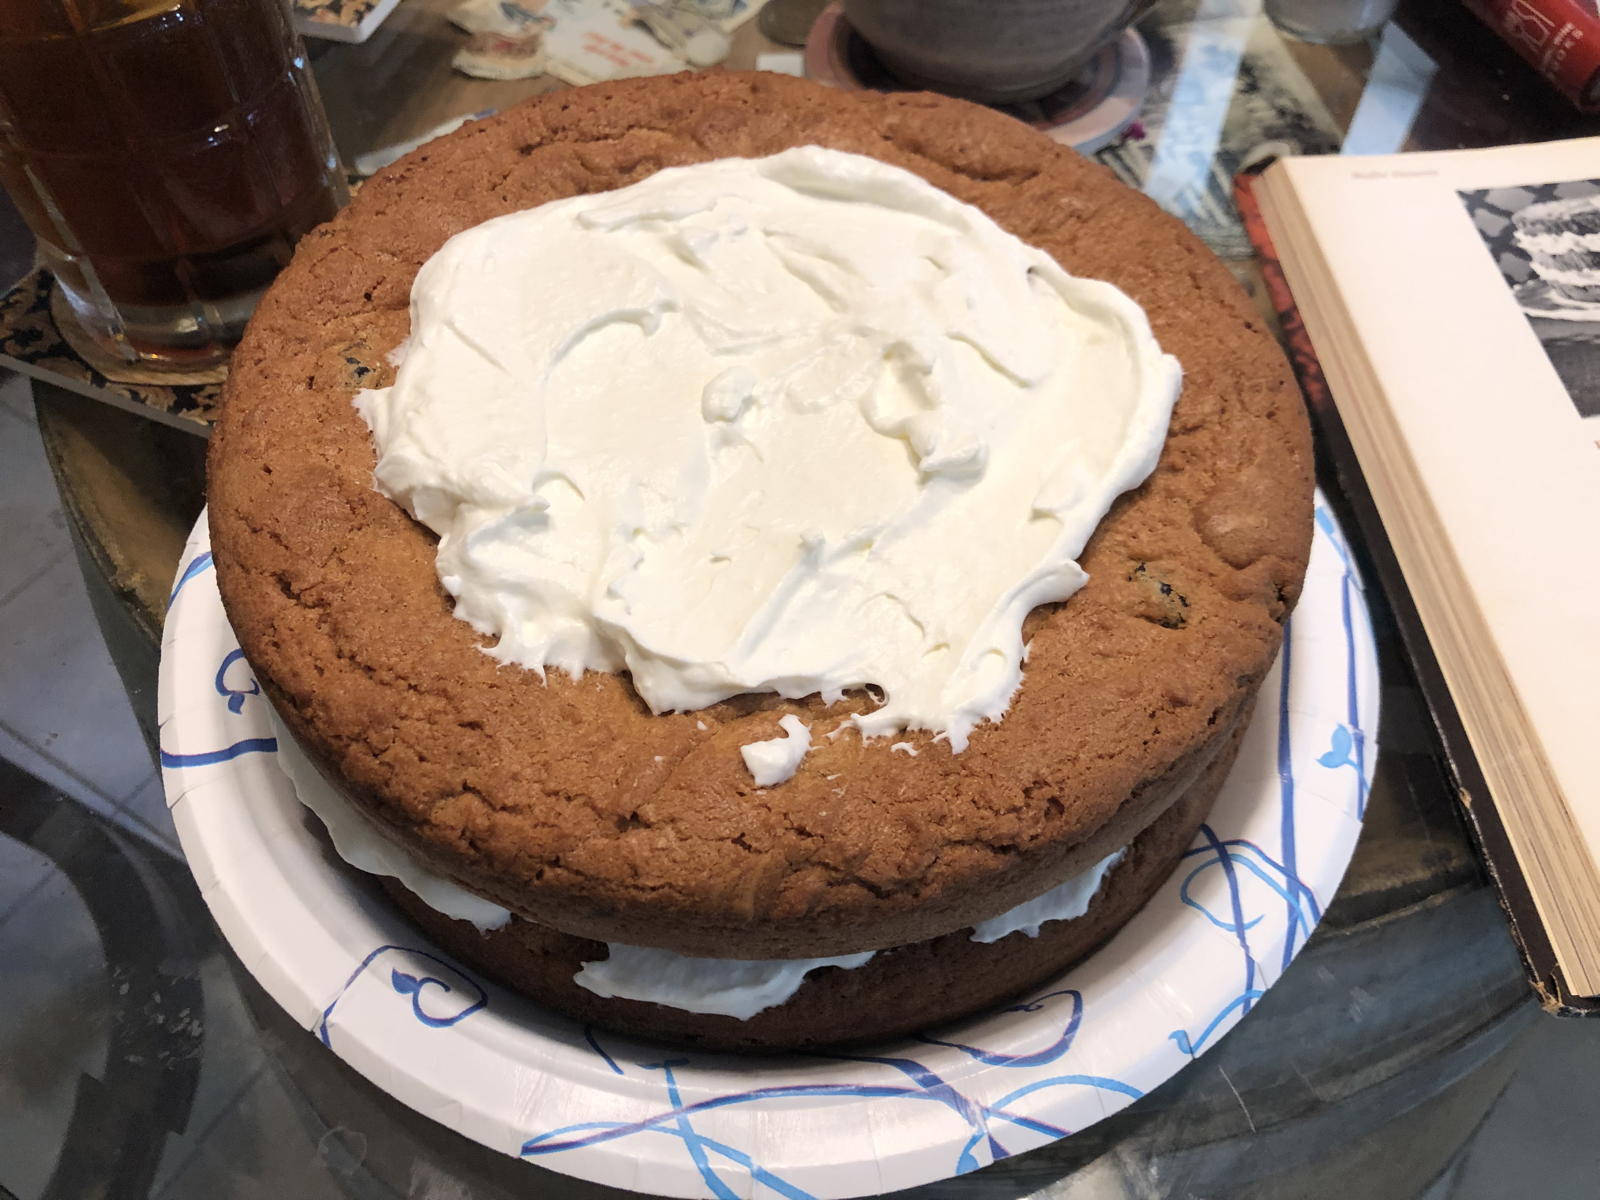 Raisin-Coconut Torte: A raisin-coconut torte from The Southern Living Fondue and Buffet Cookbook. It’s really just giant cookies layered on top of each other.; sweets; cookies